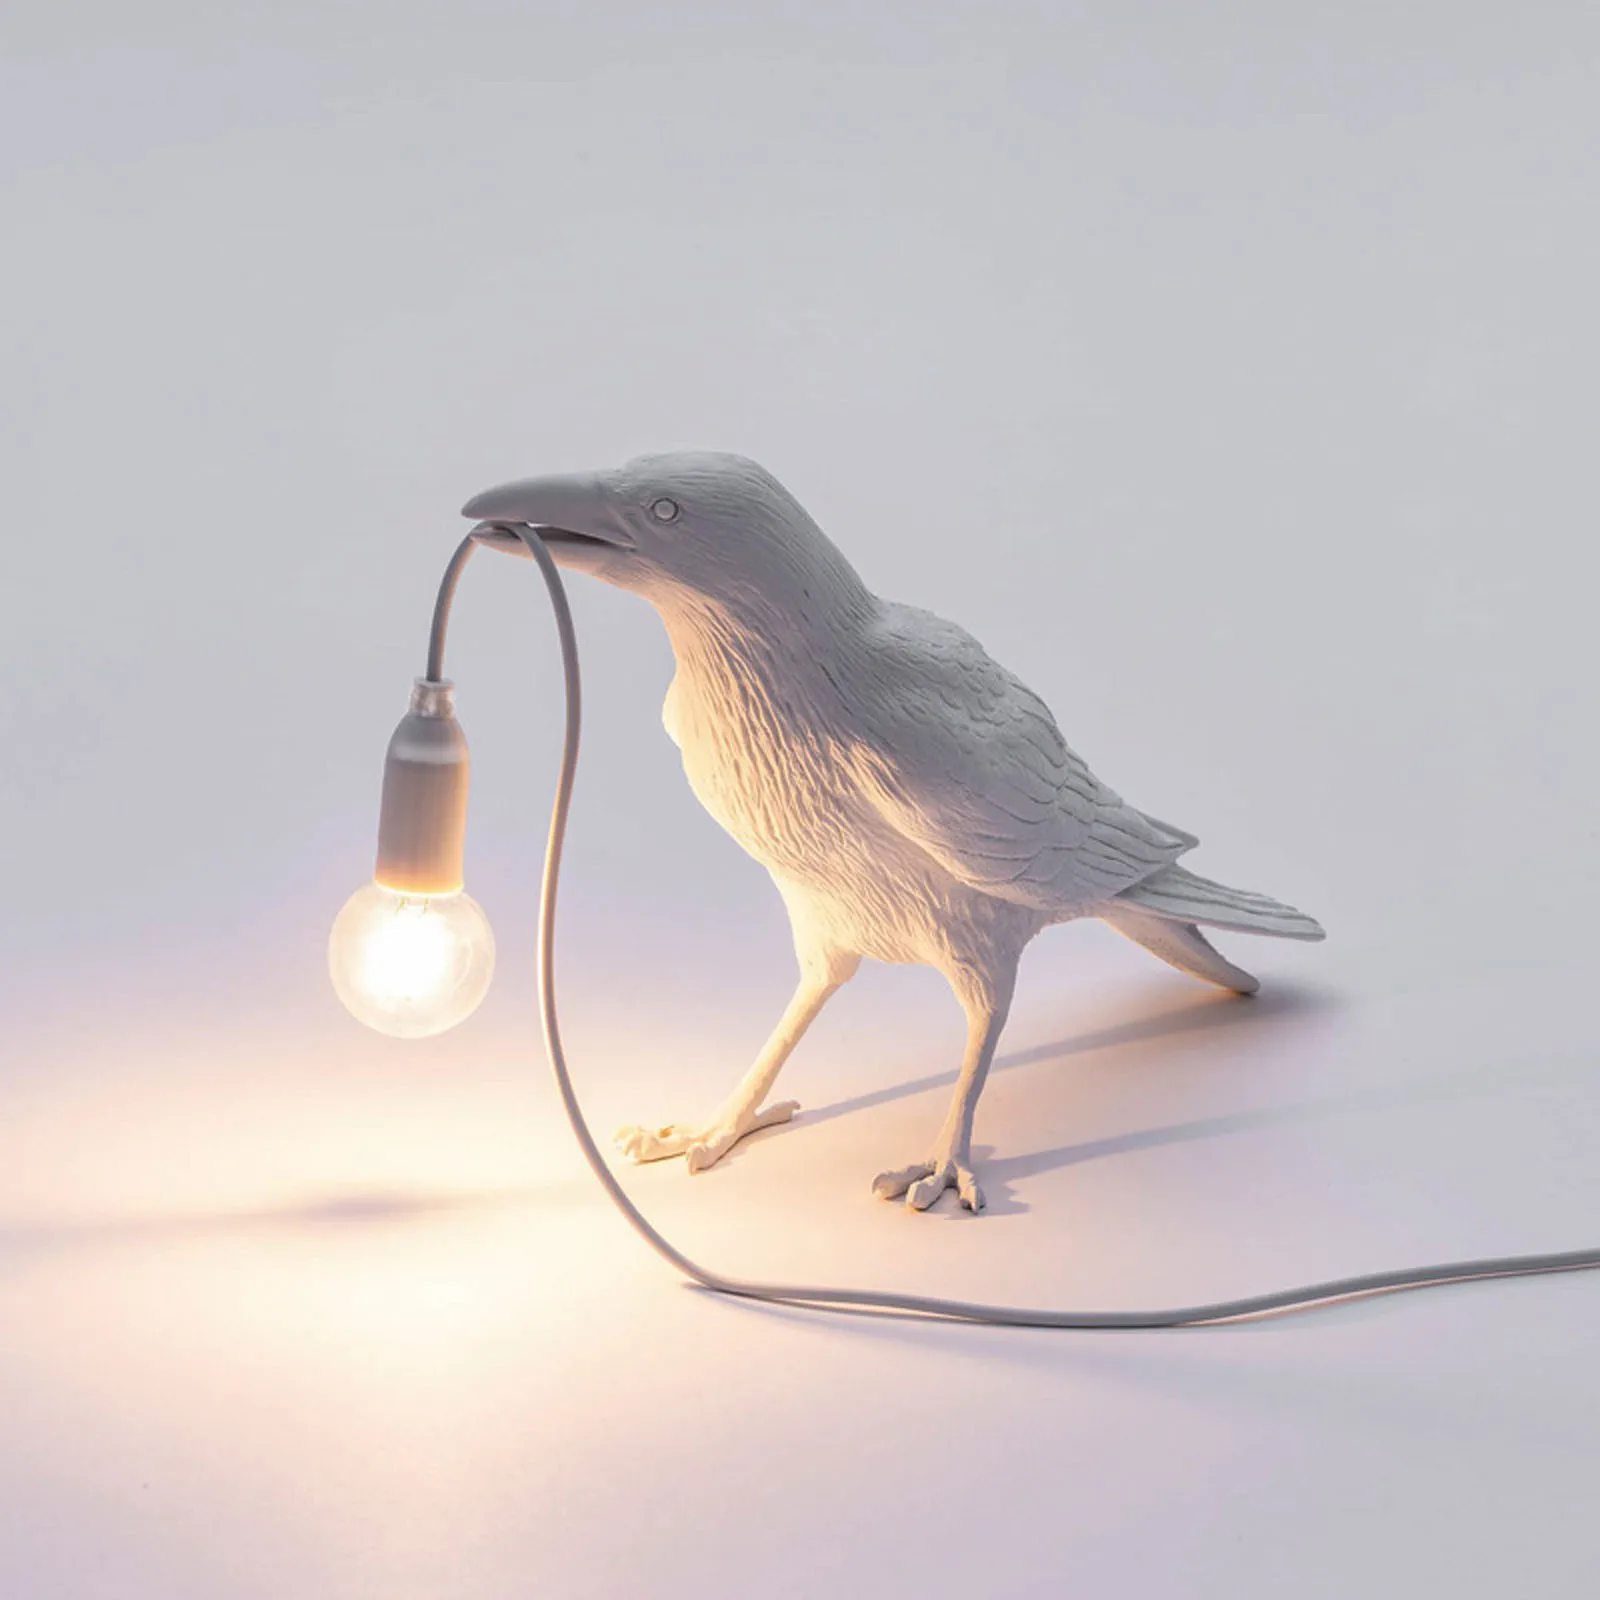 

New Creative Eight Two-color Bird Model Bedside Nightlight Ornaments Nordic Style Home Decorations Exquisite Housewarming Gifts